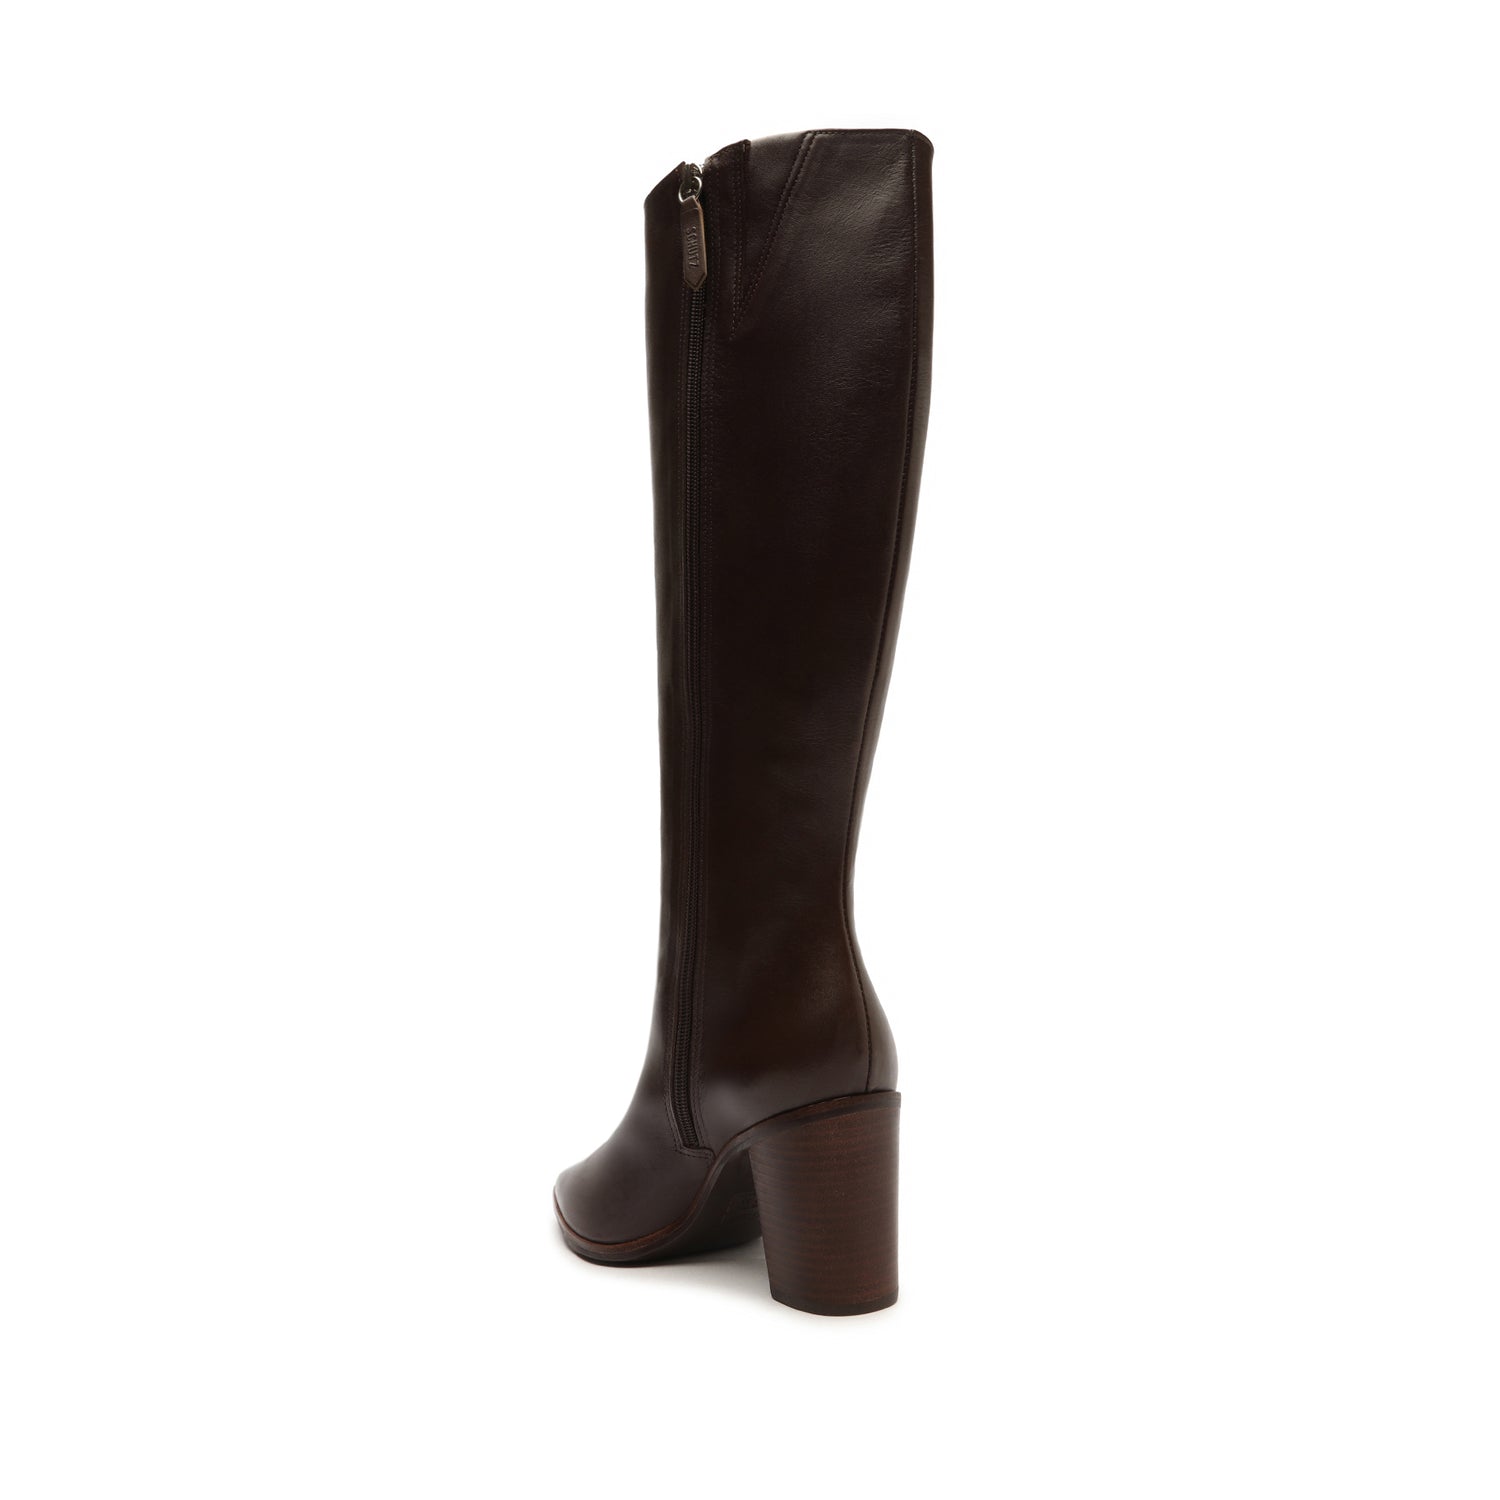 Women's Boots, Combat, Ankle, Cowboy, Leather | Cotton On South Africa